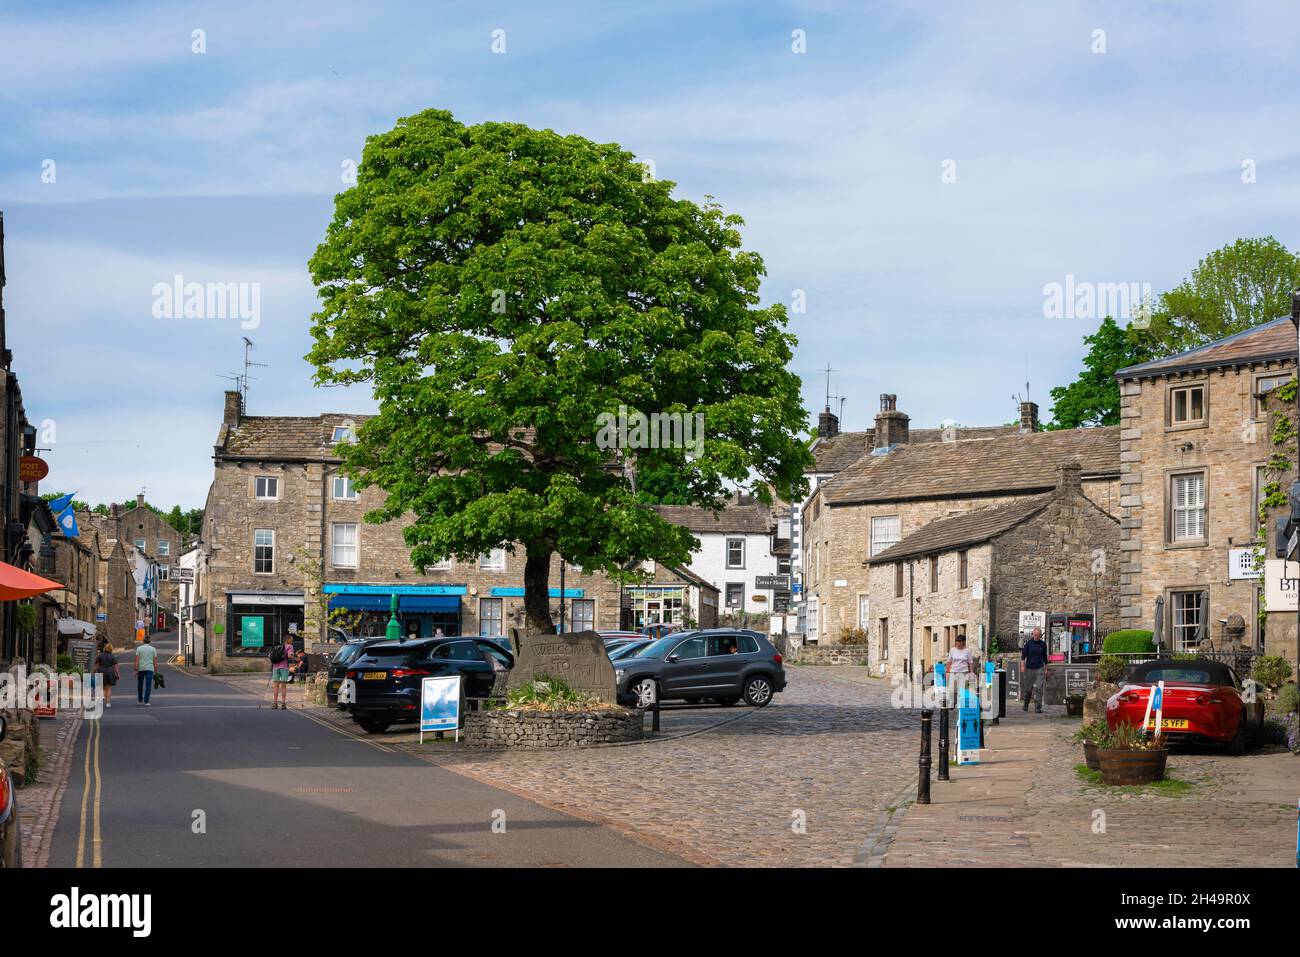 Grassington Yorkshire, view in summer of the Market Square in the centre of Grassington, a scenic market town in the Yorkshire Dales, England, UK Stock Photo